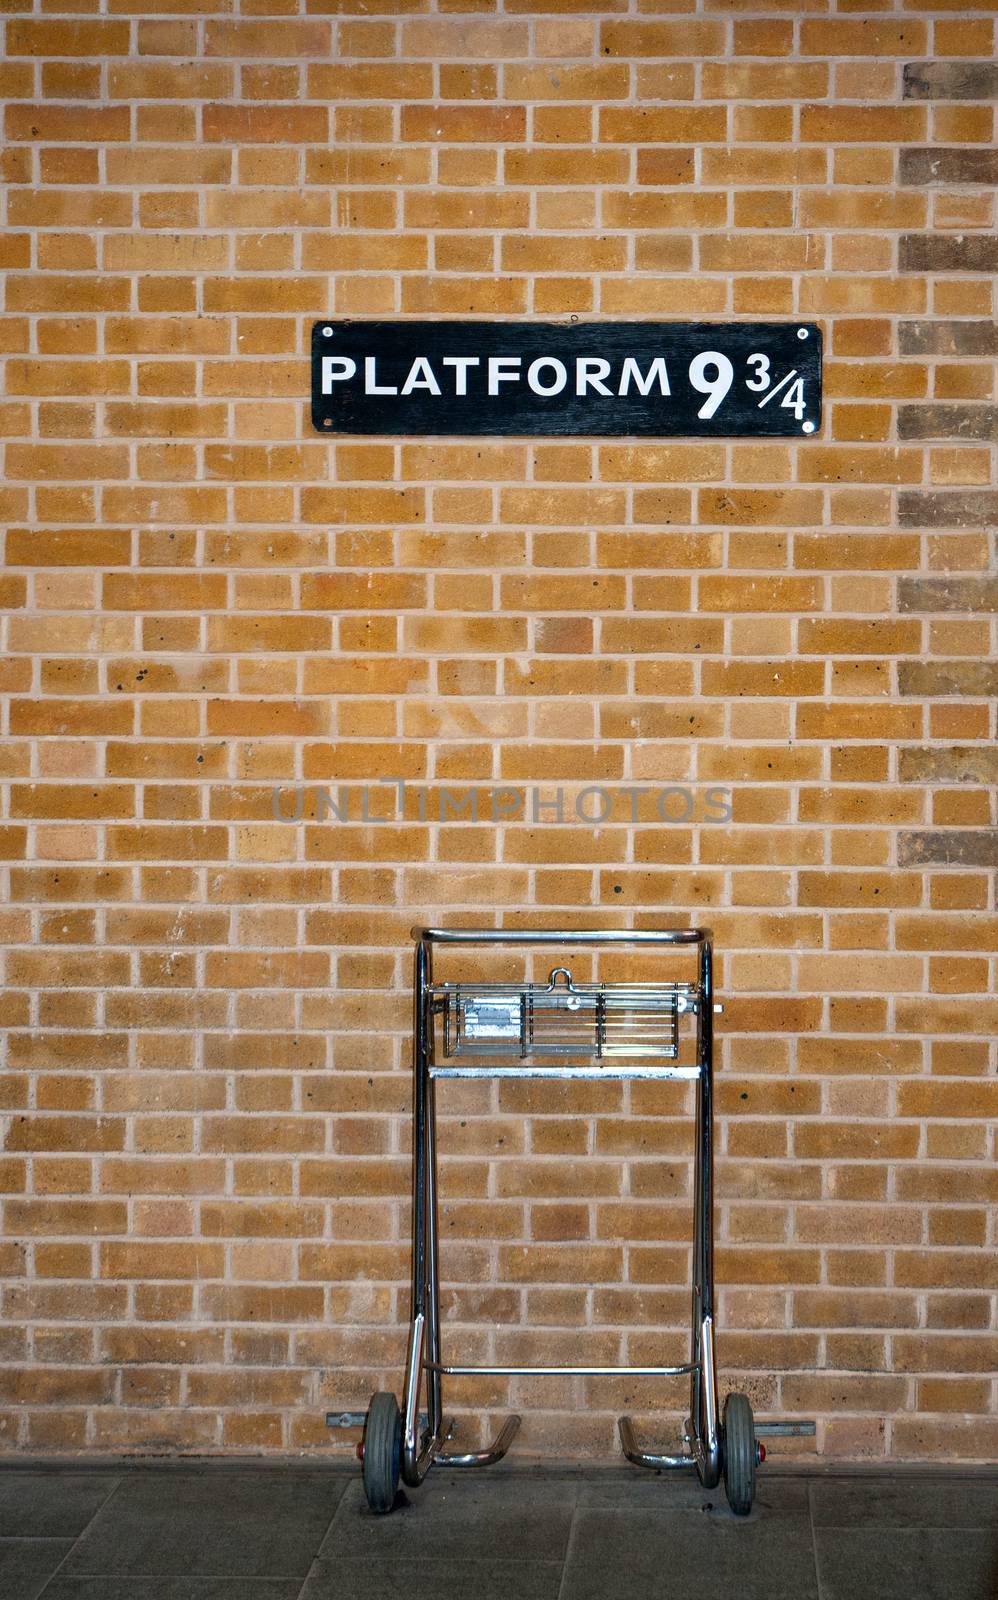 Platform 9 3/4 and Trolley by TimAwe